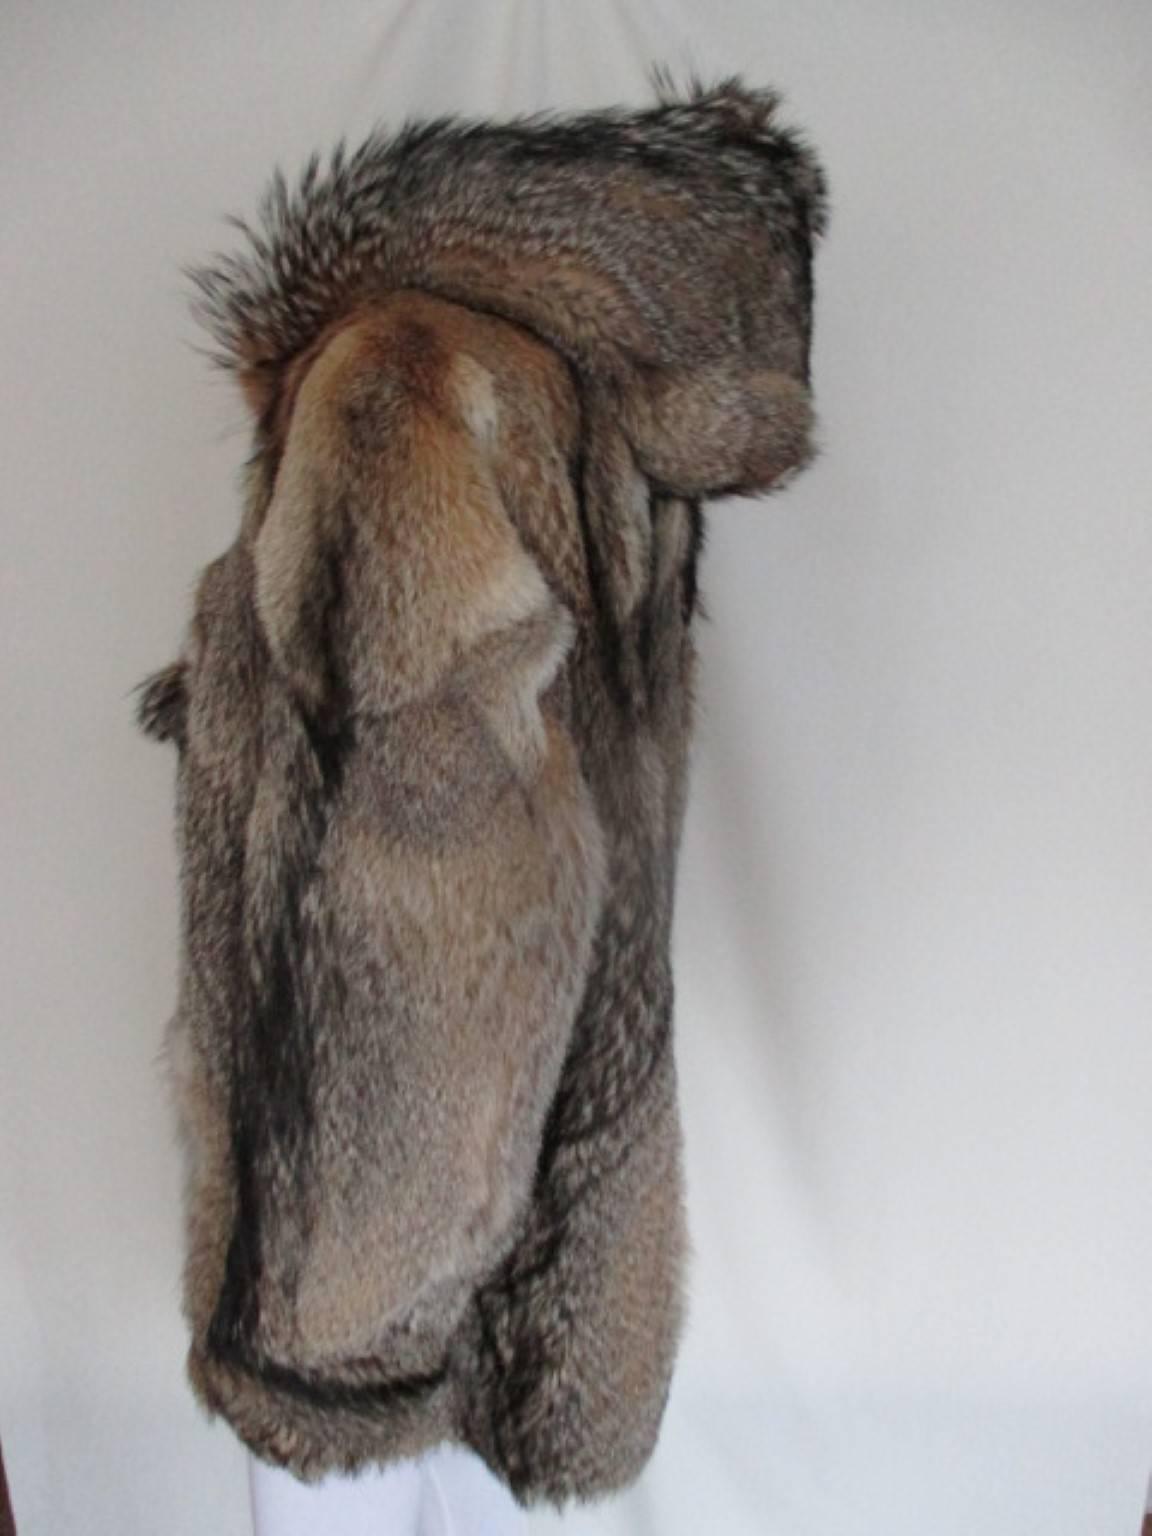 Very rare vintage wolf fur jacket with hood.
The coat has 2 pockets , 4 closing hooks and 2 cords with fur.
Its from atelier Peters pelze, Germany.

Size is about medium, EU 40/42- US 10